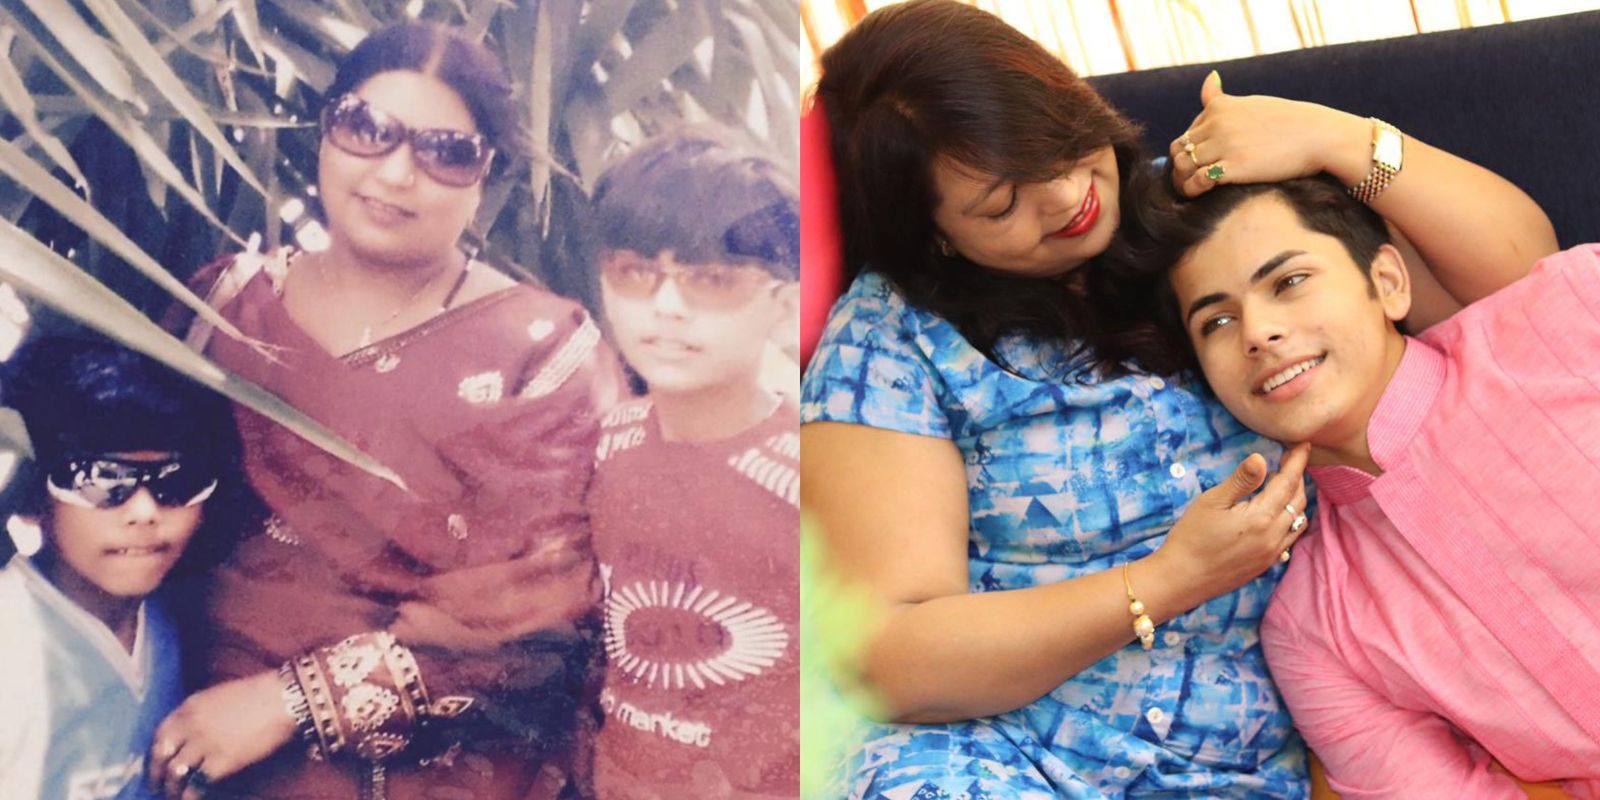 Exclusive: On Mother's Day Siddharth Nigam Has A Special Gift For His Mom In The Form Of A Thoughtful Promise